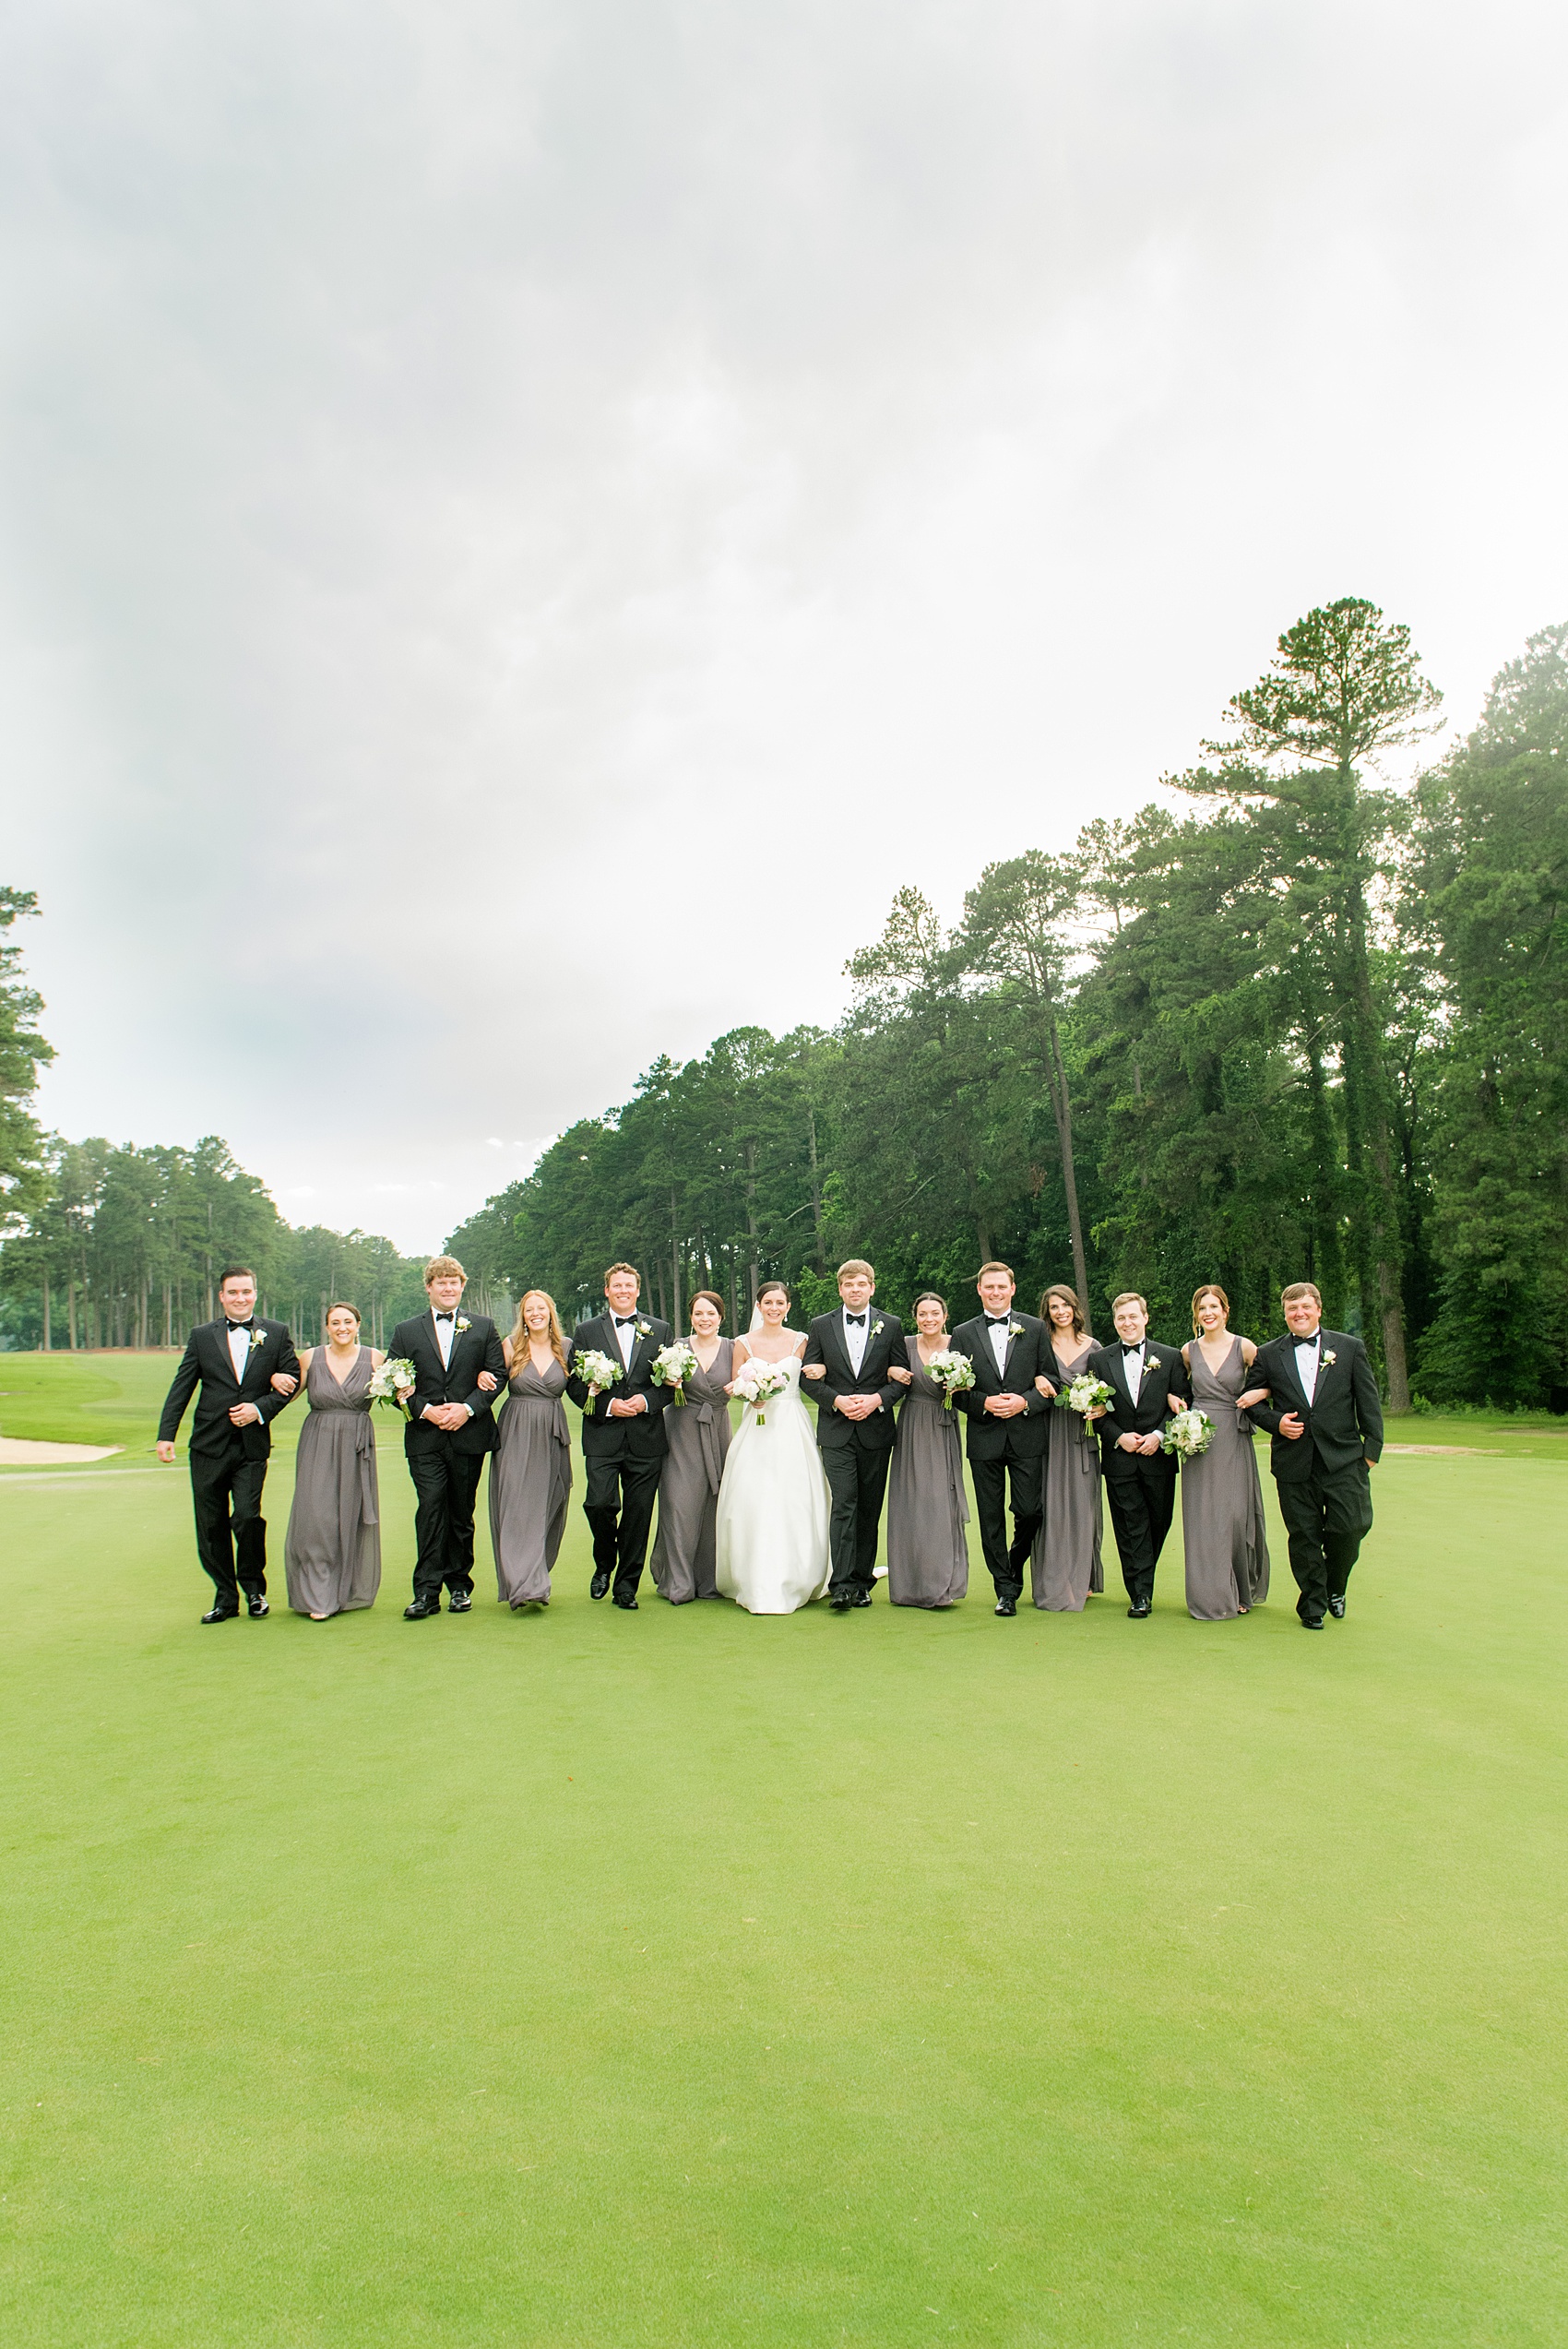 Mikkel Paige Photography pictures of a venue in Durham, North Carolina. The Washington Duke Inn is perfect for a summer wedding! Planning for this beautiful event was by McLean Events. The bride, groom and bridal party had their pictures taken on the picturesque golf course. The bridesmaids wore grey chiffon gowns and groomsmen in classic black tuxedos. Hair and Makeup was done by Wink. Click through for more details about this June wedding with peonies! #MikkelPaige #DurhamWeddings #WashingtonDukeInn #DukeWedding #Duke #McLeanEvents #blueandwhitewedding #golfcoursewedding #golfcoursephotos #brideandgroom #bridalparty #weddingparty #greybridesmaids #peonybouquet